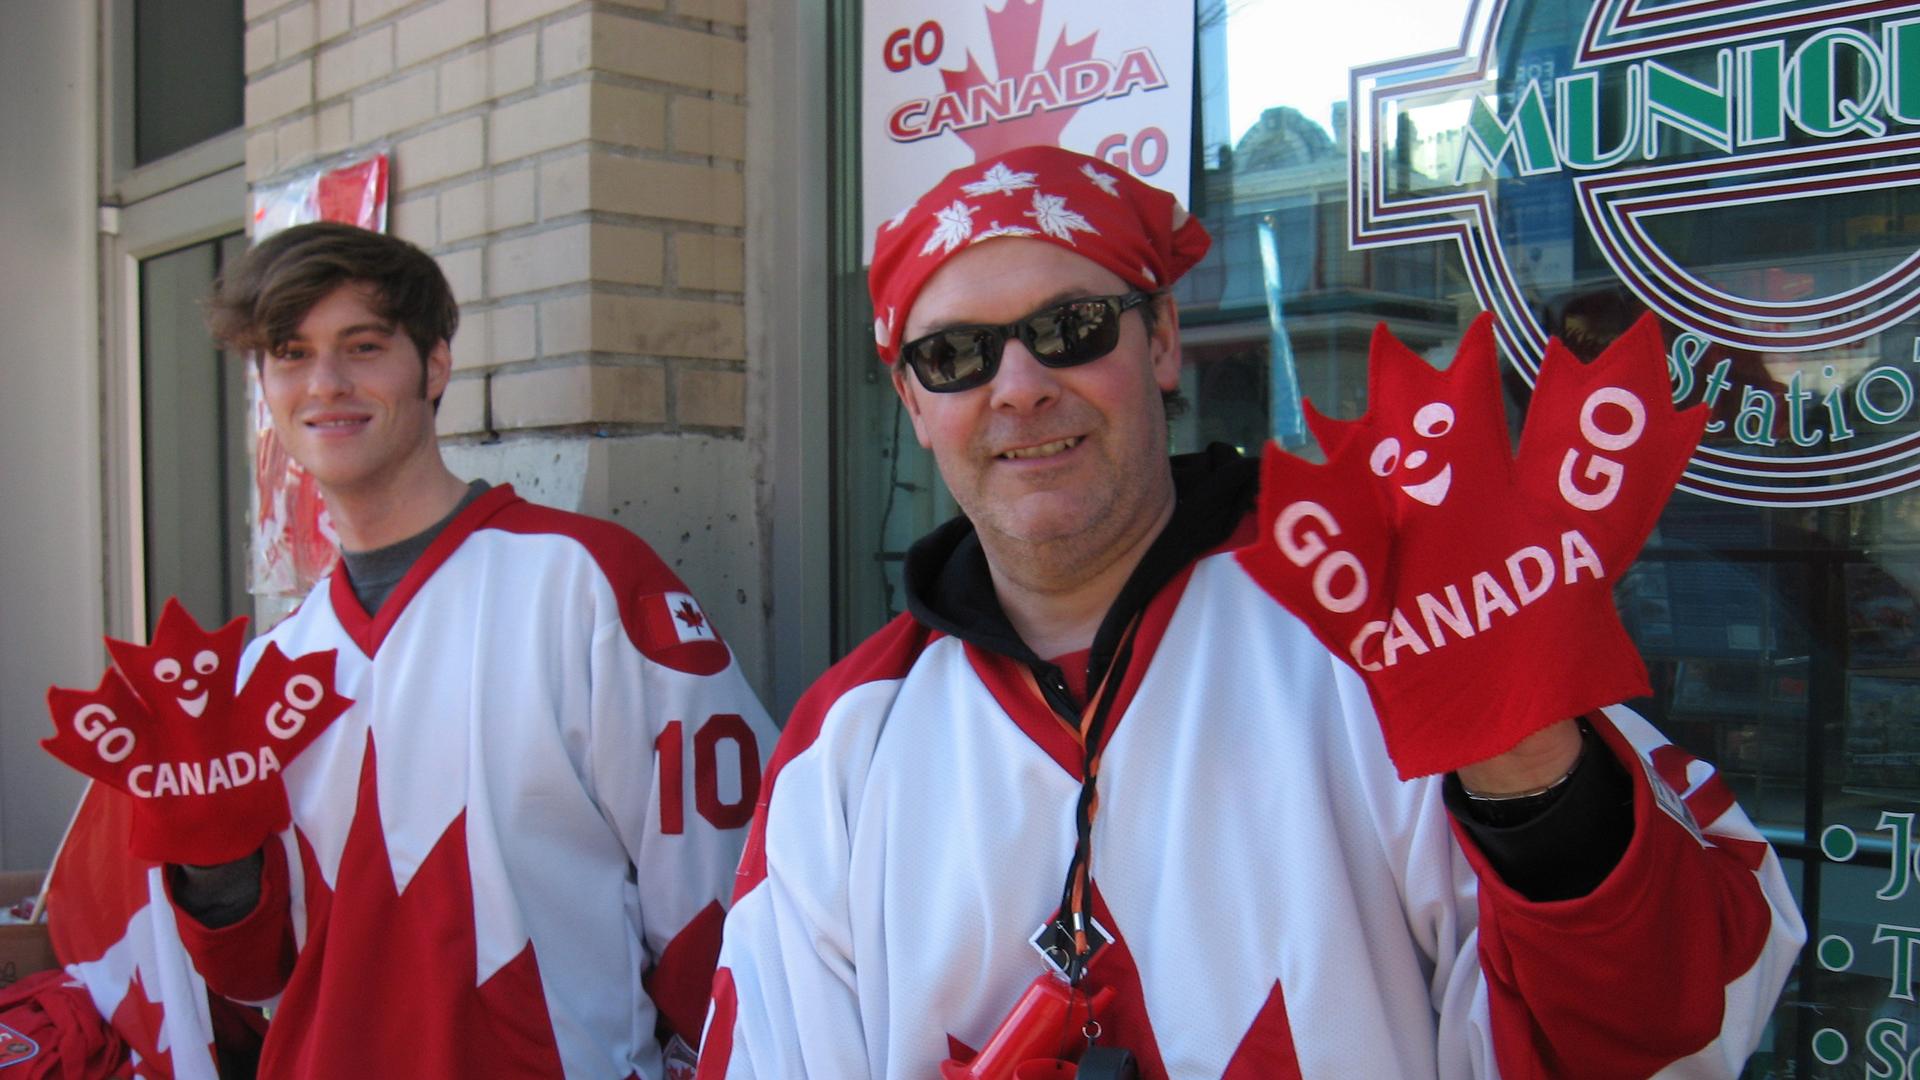 Canadian fans at 2010 Vancouver Winter Olympics.